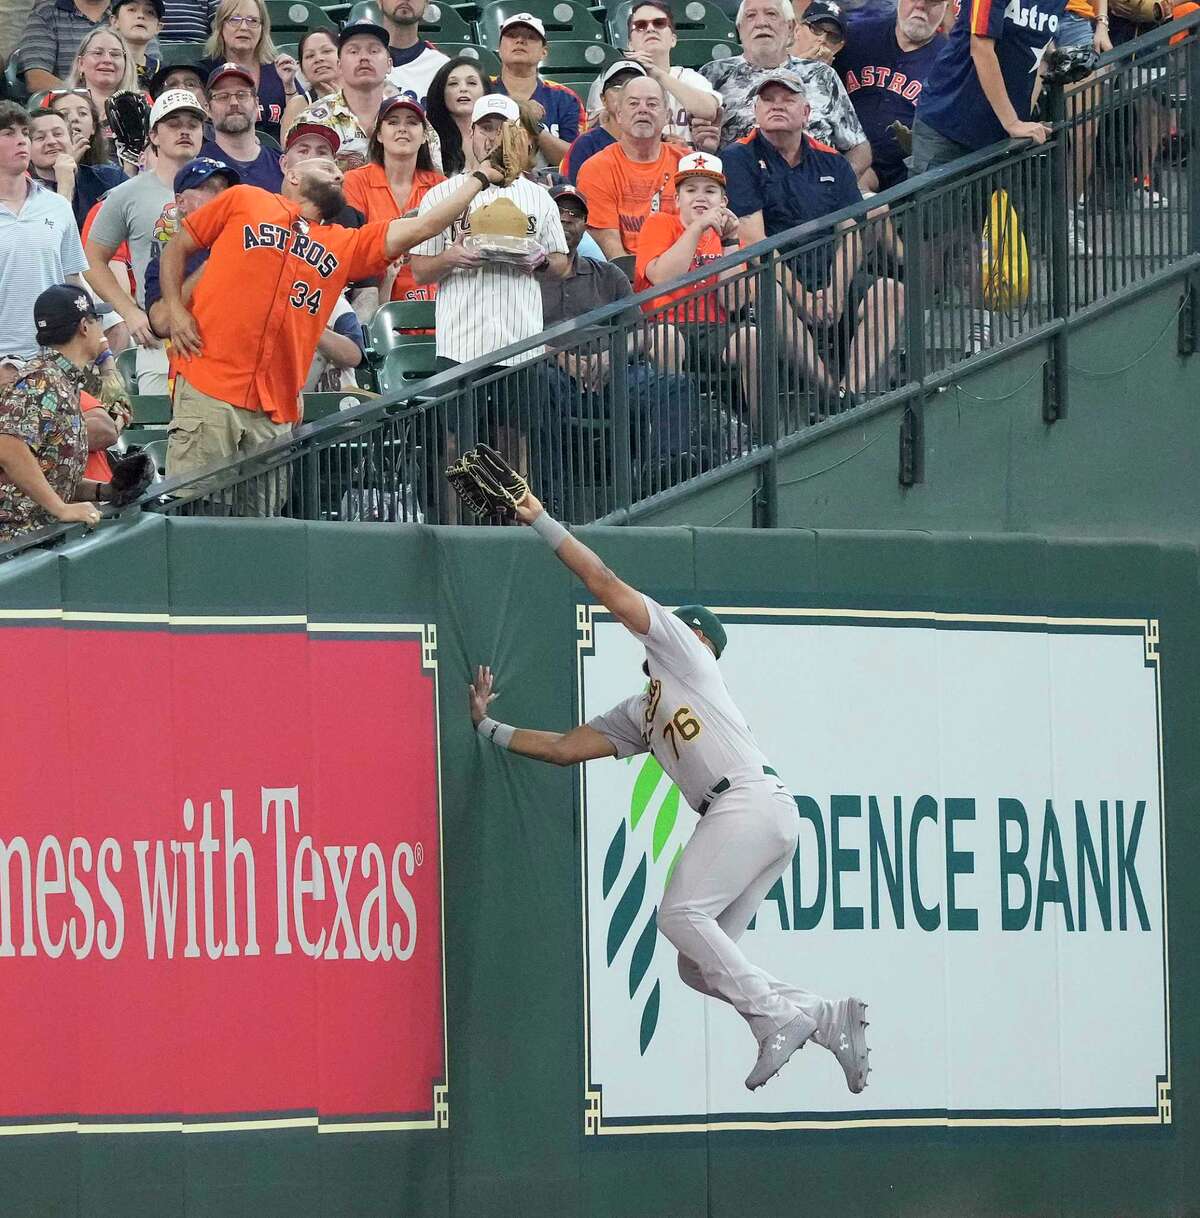 Oakland Athletics first baseman Dermis Garcia (76) jumps up against the left field wall as a fan reached out to catch Houston Astros Yordan Alvarez’s fly out on the fan interference during the first inning of an MLB baseball game at Minute Maid Park on Sunday, Sept. 18, 2022 in Houston.